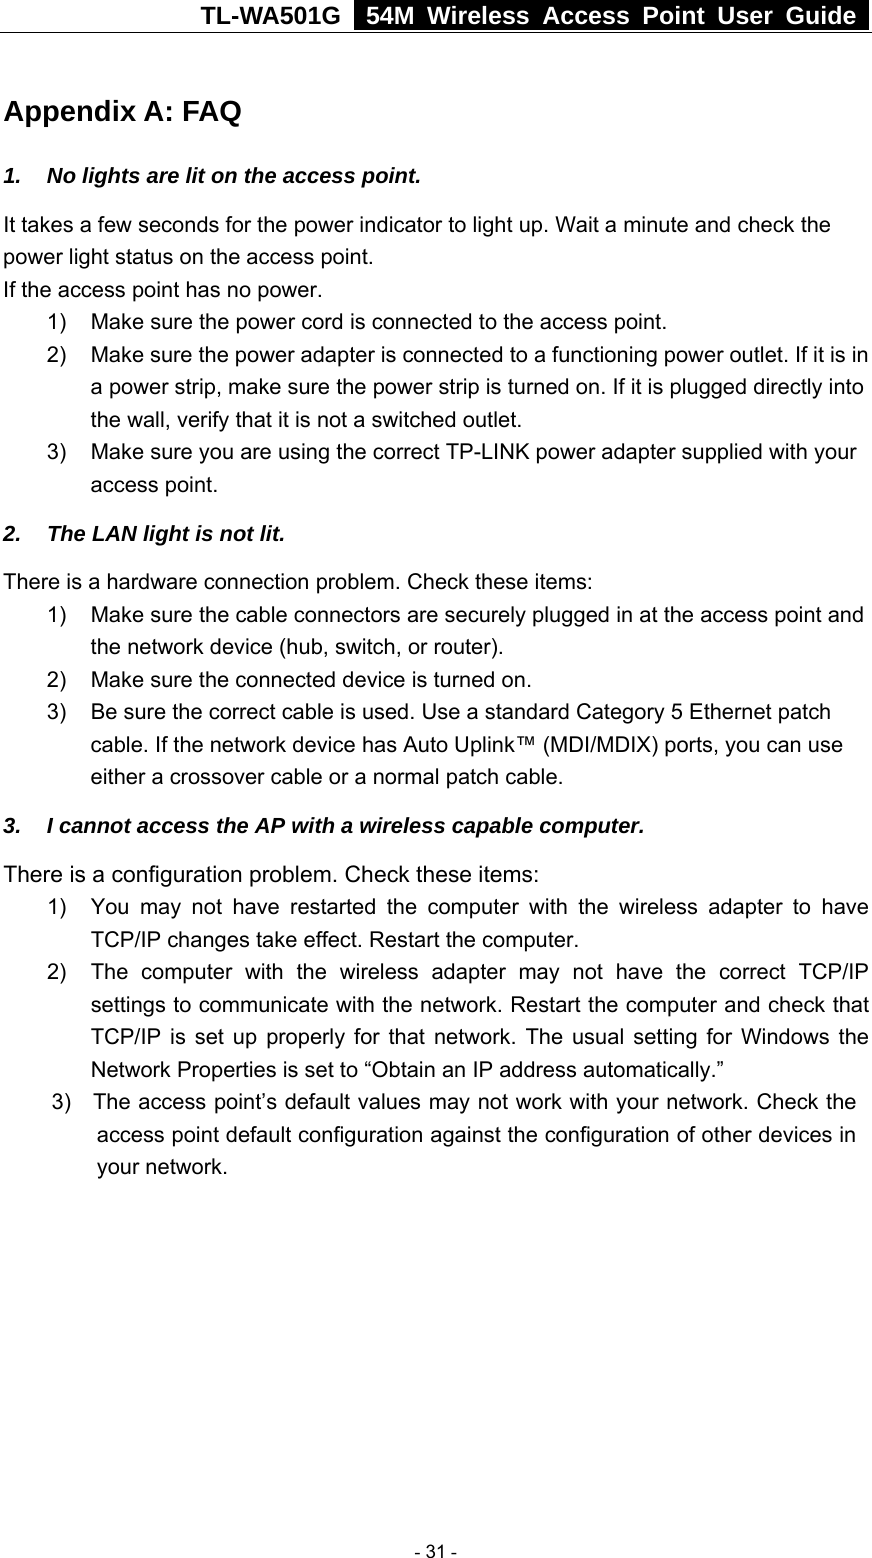 TL-WA501G   54M Wireless Access Point User Guide  Appendix A: FAQ 1.  No lights are lit on the access point. It takes a few seconds for the power indicator to light up. Wait a minute and check the power light status on the access point. If the access point has no power. 1)  Make sure the power cord is connected to the access point. 2)  Make sure the power adapter is connected to a functioning power outlet. If it is in a power strip, make sure the power strip is turned on. If it is plugged directly into the wall, verify that it is not a switched outlet. 3)  Make sure you are using the correct TP-LINK power adapter supplied with your access point. 2.  The LAN light is not lit. There is a hardware connection problem. Check these items: 1)  Make sure the cable connectors are securely plugged in at the access point and the network device (hub, switch, or router). 2)  Make sure the connected device is turned on. 3)  Be sure the correct cable is used. Use a standard Category 5 Ethernet patch cable. If the network device has Auto Uplink™ (MDI/MDIX) ports, you can use either a crossover cable or a normal patch cable. 3.  I cannot access the AP with a wireless capable computer. There is a configuration problem. Check these items: 1)  You may not have restarted the computer with the wireless adapter to have TCP/IP changes take effect. Restart the computer. 2)  The computer with the wireless adapter may not have the correct TCP/IP settings to communicate with the network. Restart the computer and check that TCP/IP is set up properly for that network. The usual setting for Windows the Network Properties is set to “Obtain an IP address automatically.” 3)    The access point’s default values may not work with your network. Check the access point default configuration against the configuration of other devices in your network.    - 31 - 